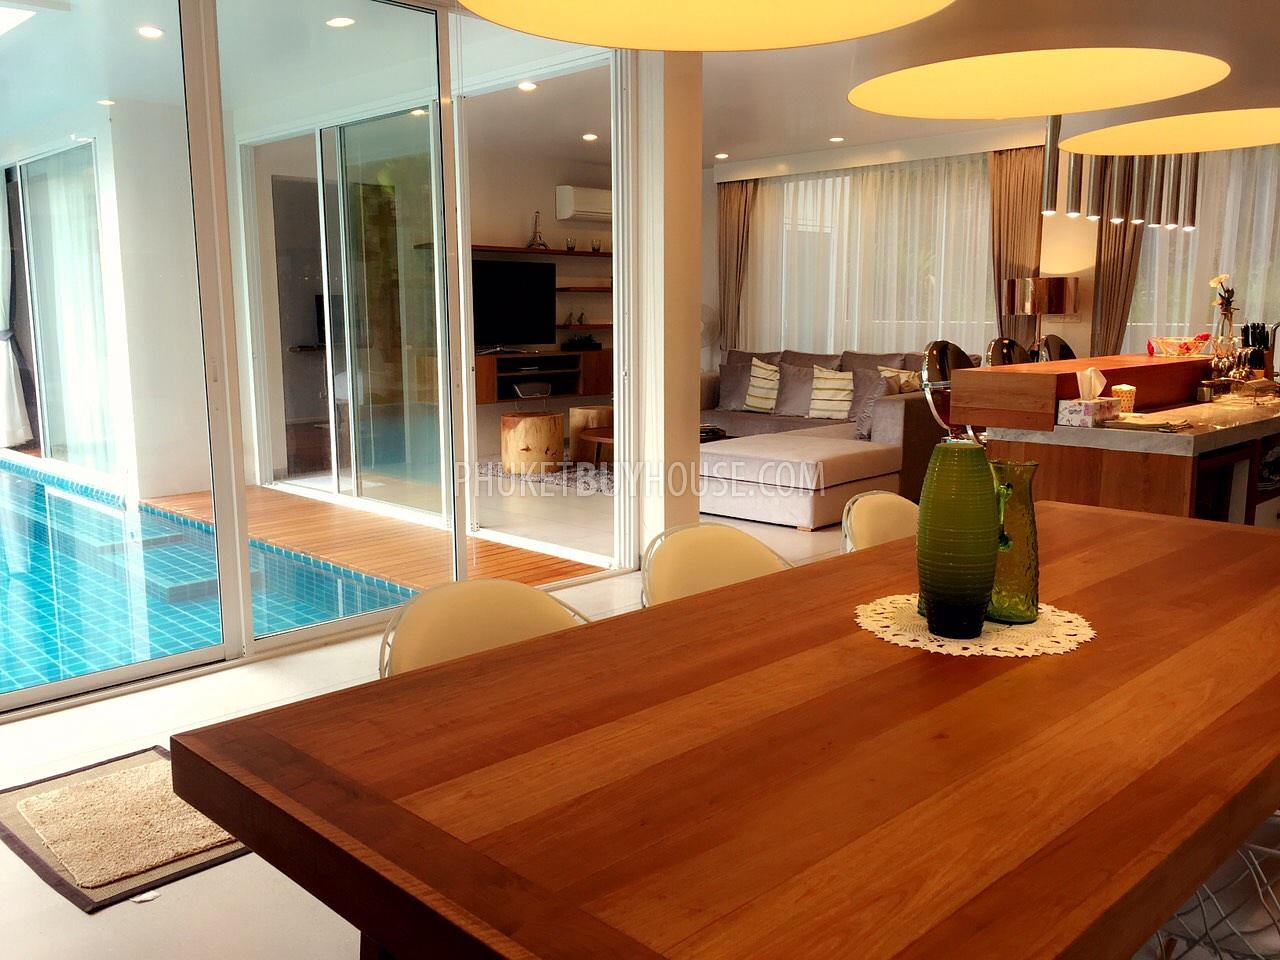 CHA2317: Luxury 3 bedroom Villa with private swimming pool and elegant sunbathing area in Chalong. Photo #20